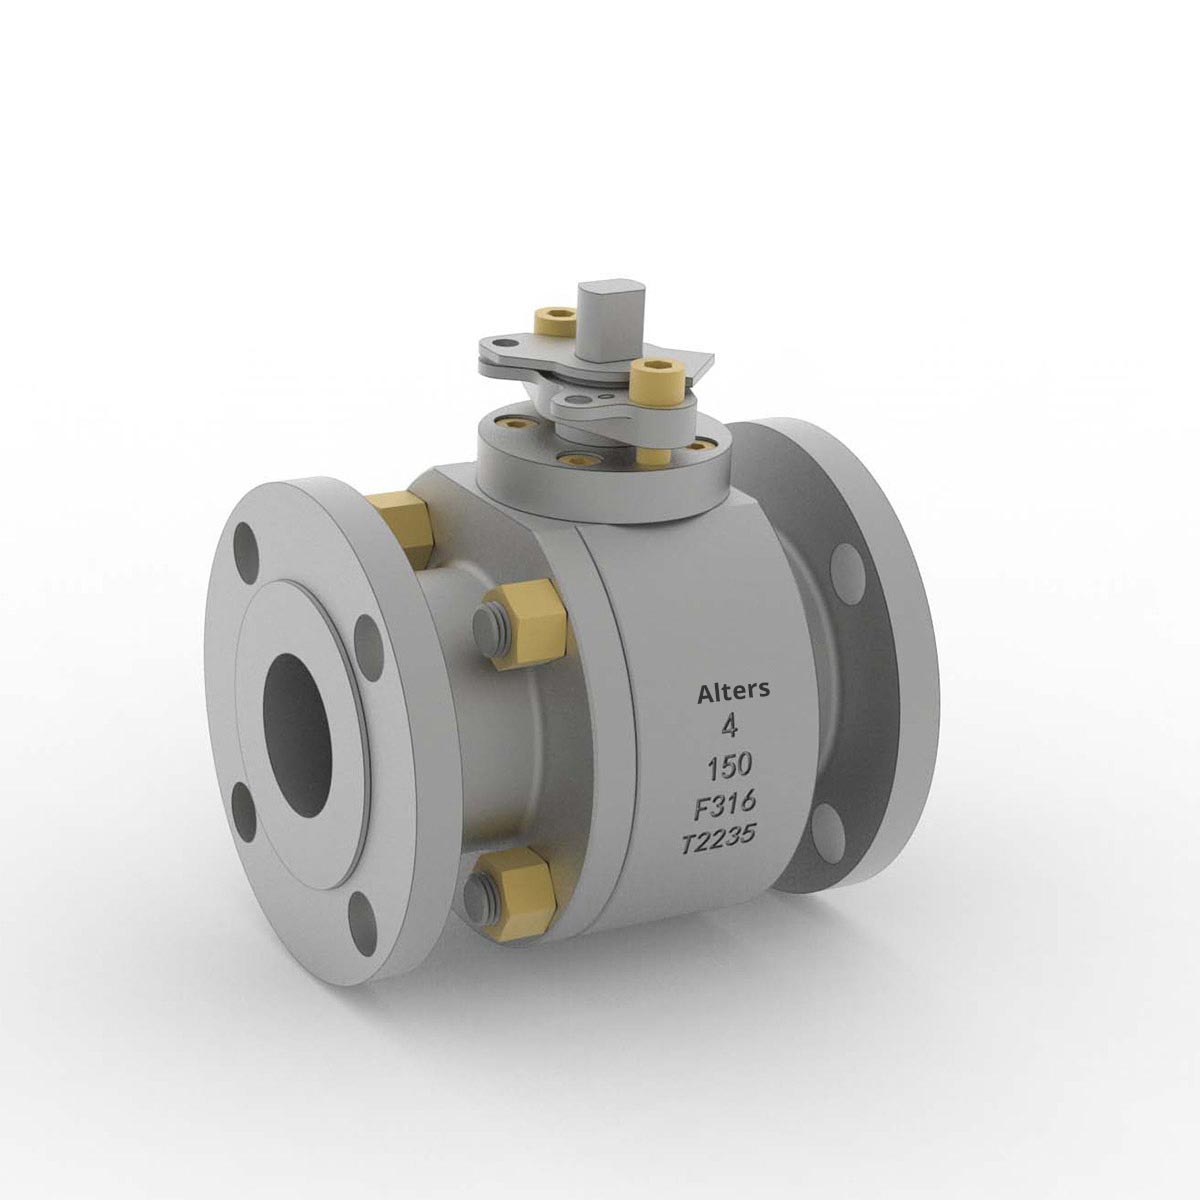 Image of a home ball valve from AlterValve with company name and specifications.